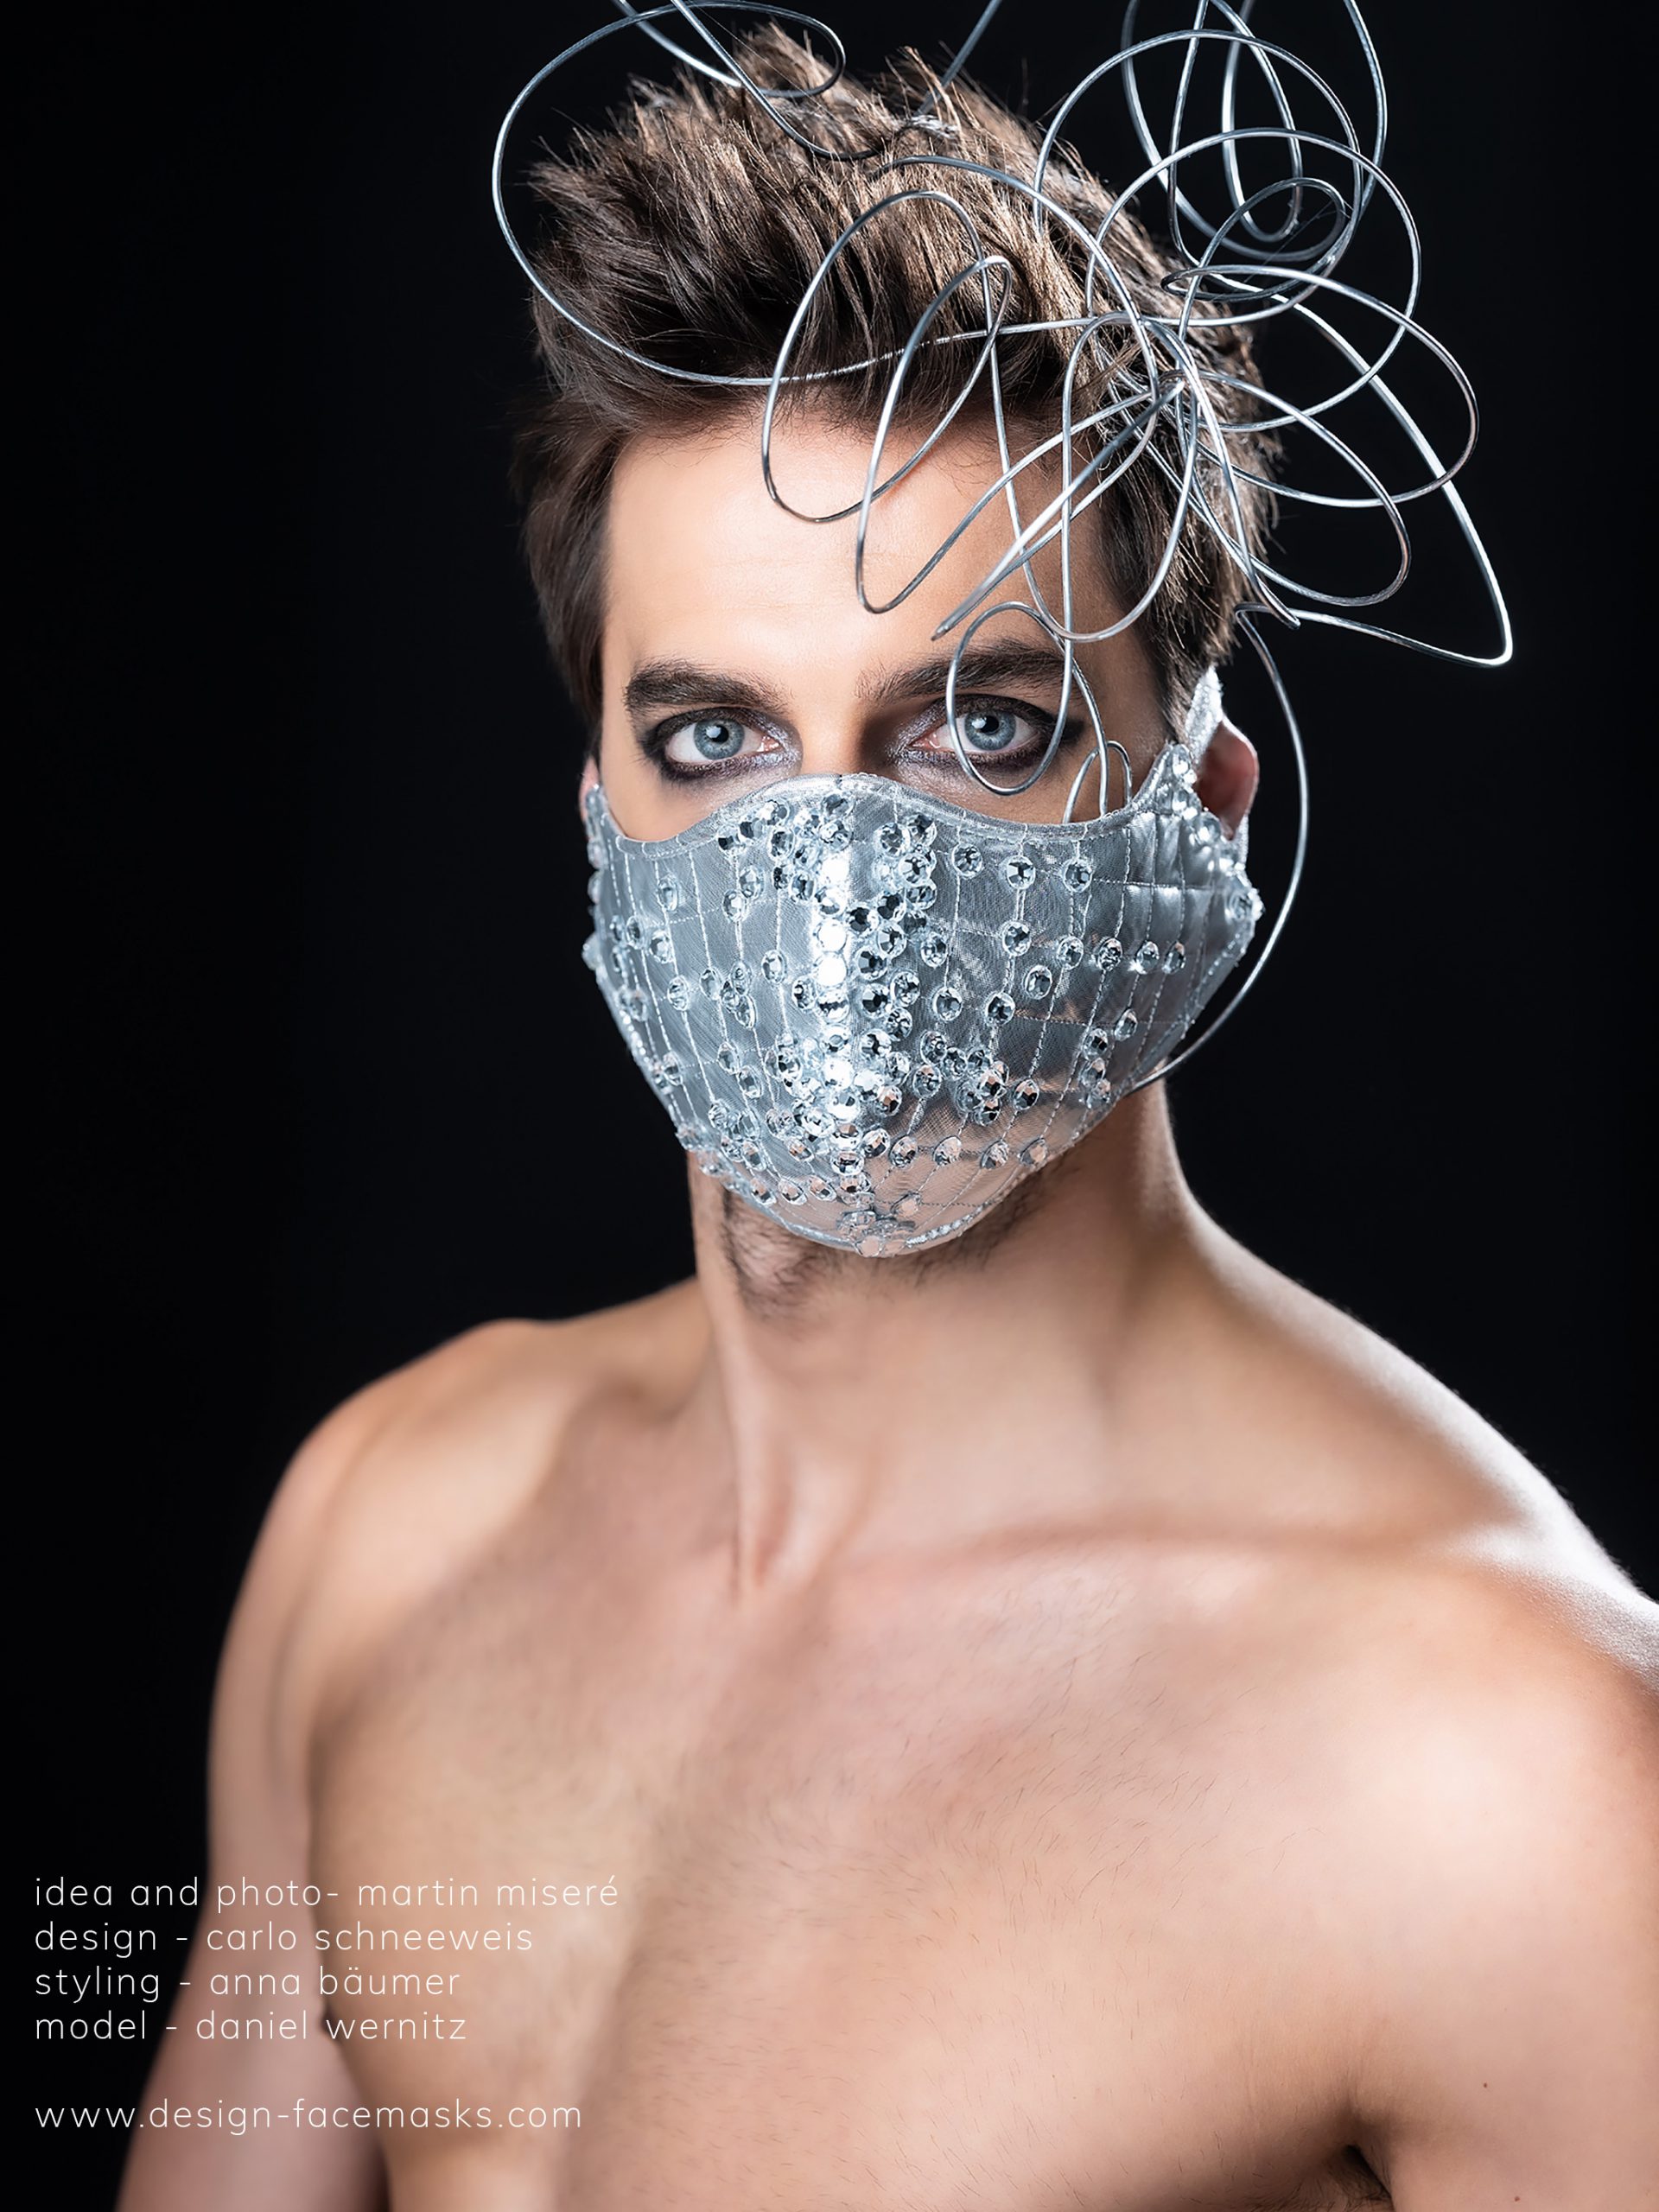 Design Facemask Model Daniel Wernitz wearing facemask of fashion designer Carlo Schneeweis photographed by Martin Misere